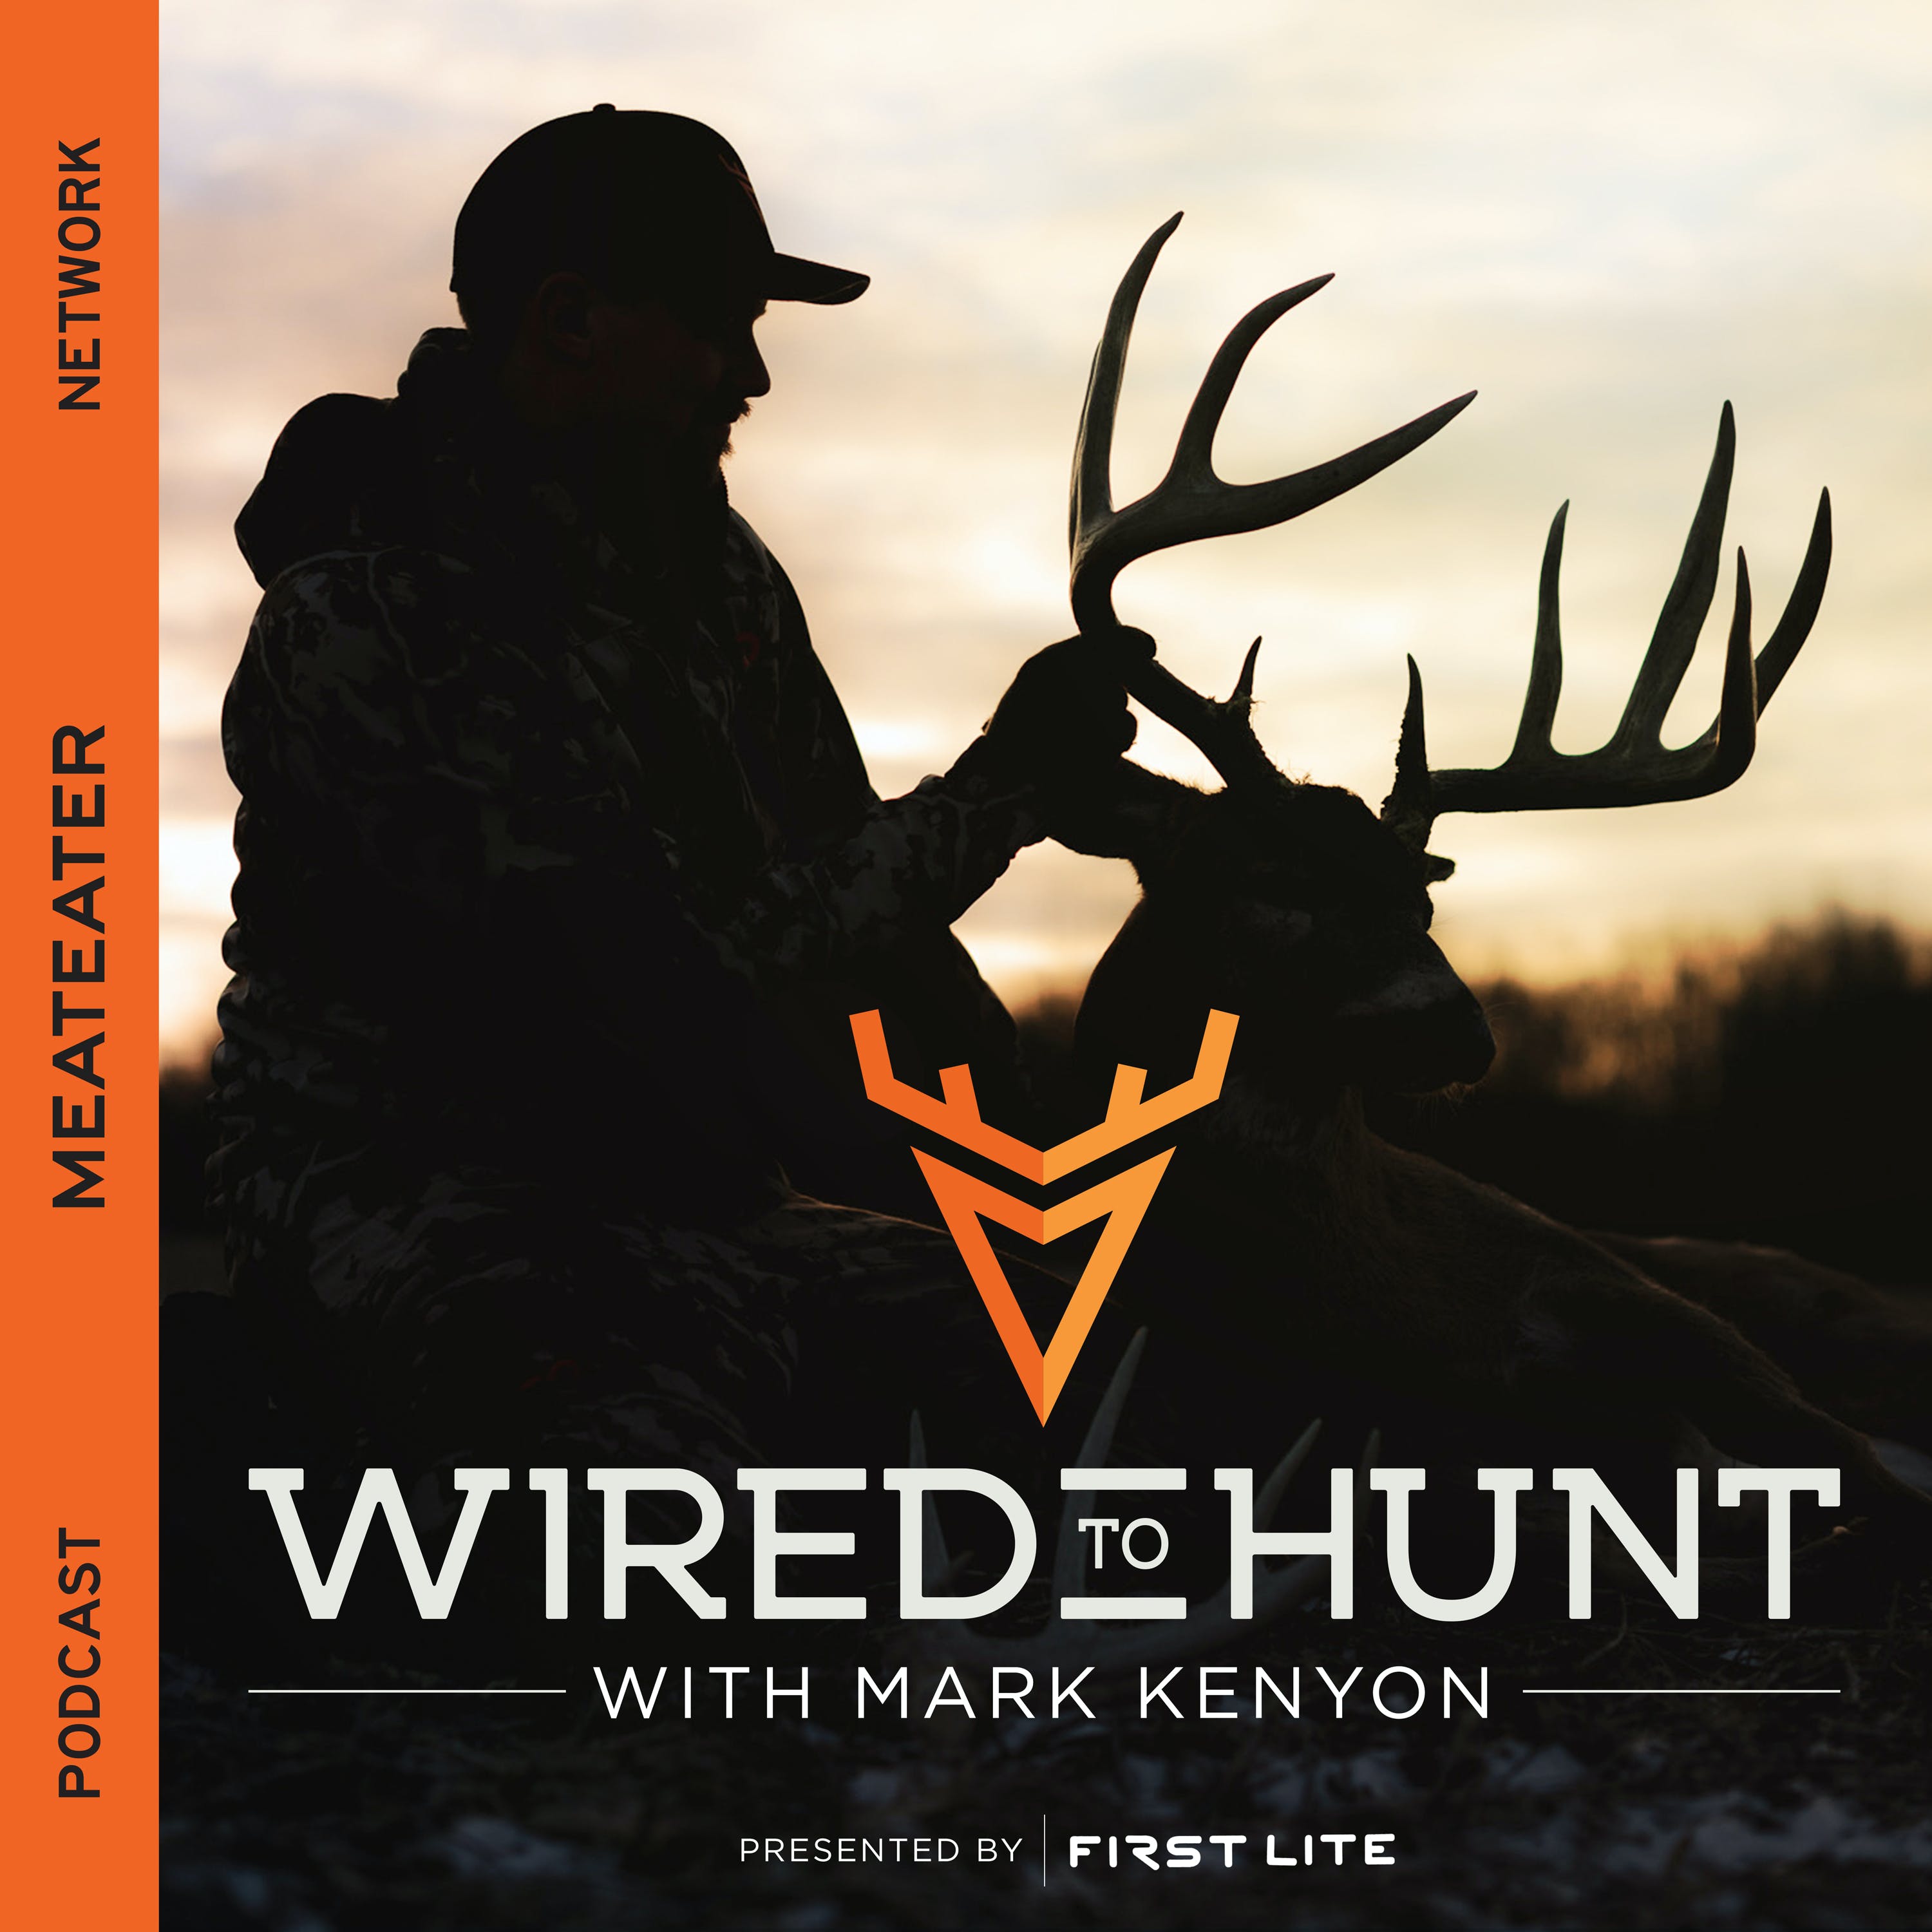 Ep. 519: How to Hunt AND Save Grassland Habitat for Whitetails with Torin Miller and Bethany Erb